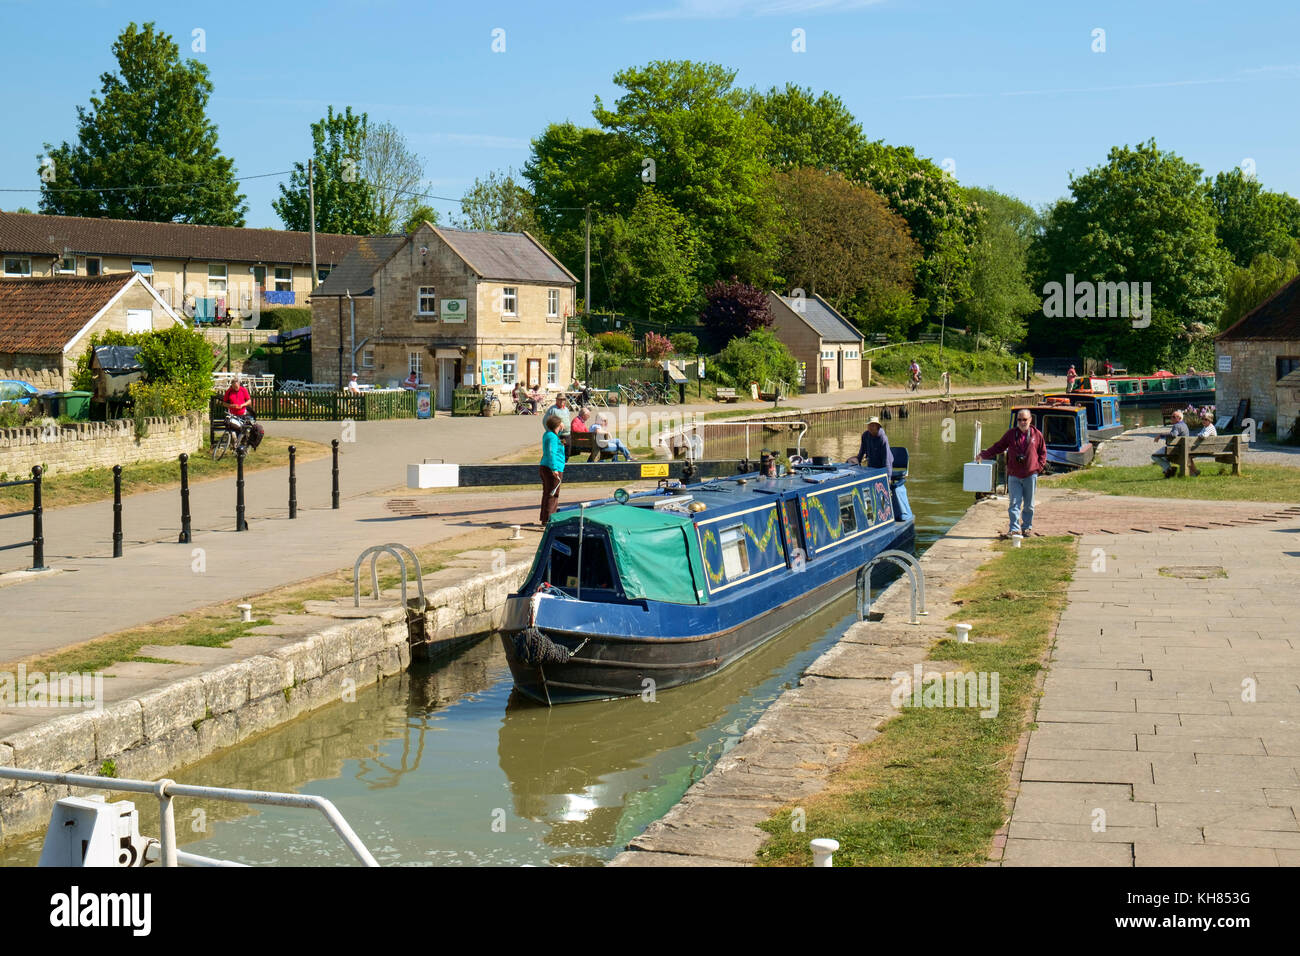 Spring sunshine brings sightseers to Bradford Wharf and Bradford Lock on The Kennet & Avon Canal in Bradford on Avon, Wiltshire, UK Stock Photo